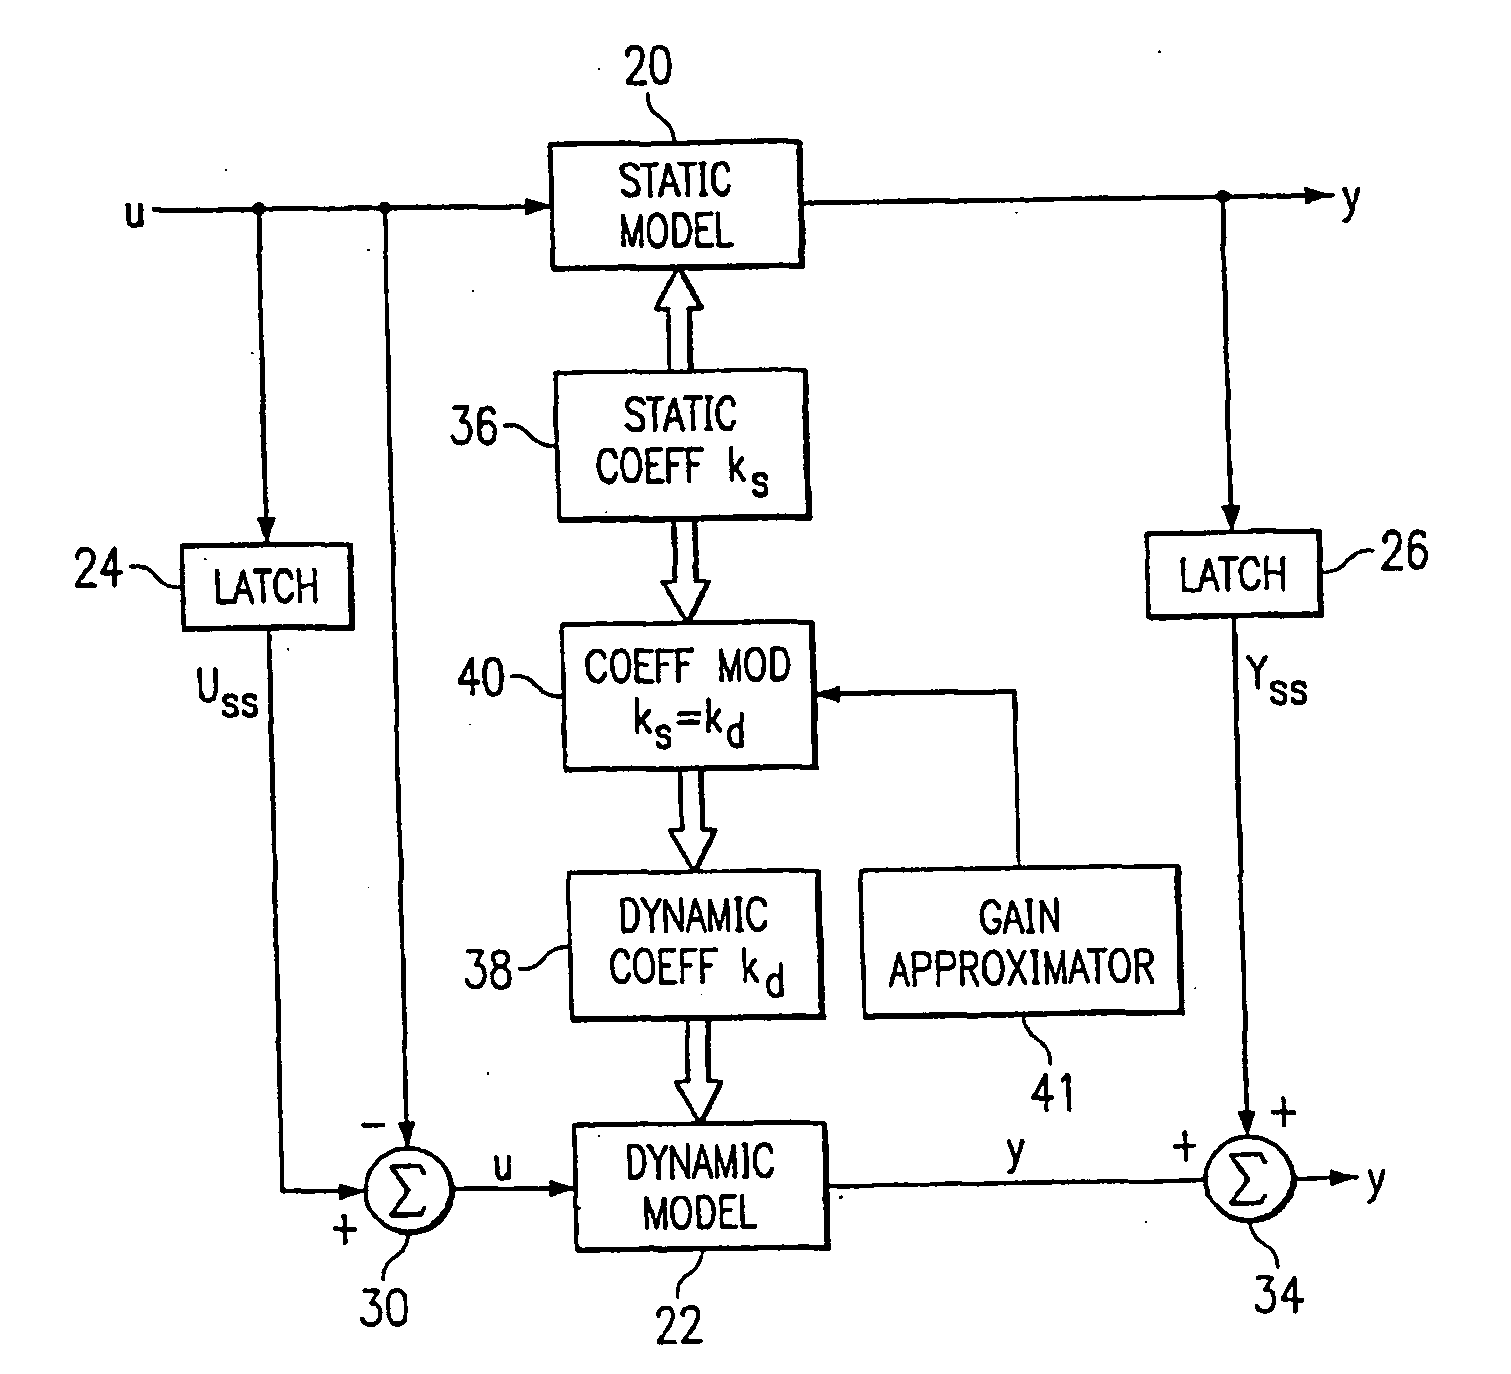 Method and apparatus for approximating gains in dynamic and steady-state processes for prediction, control, and optimization